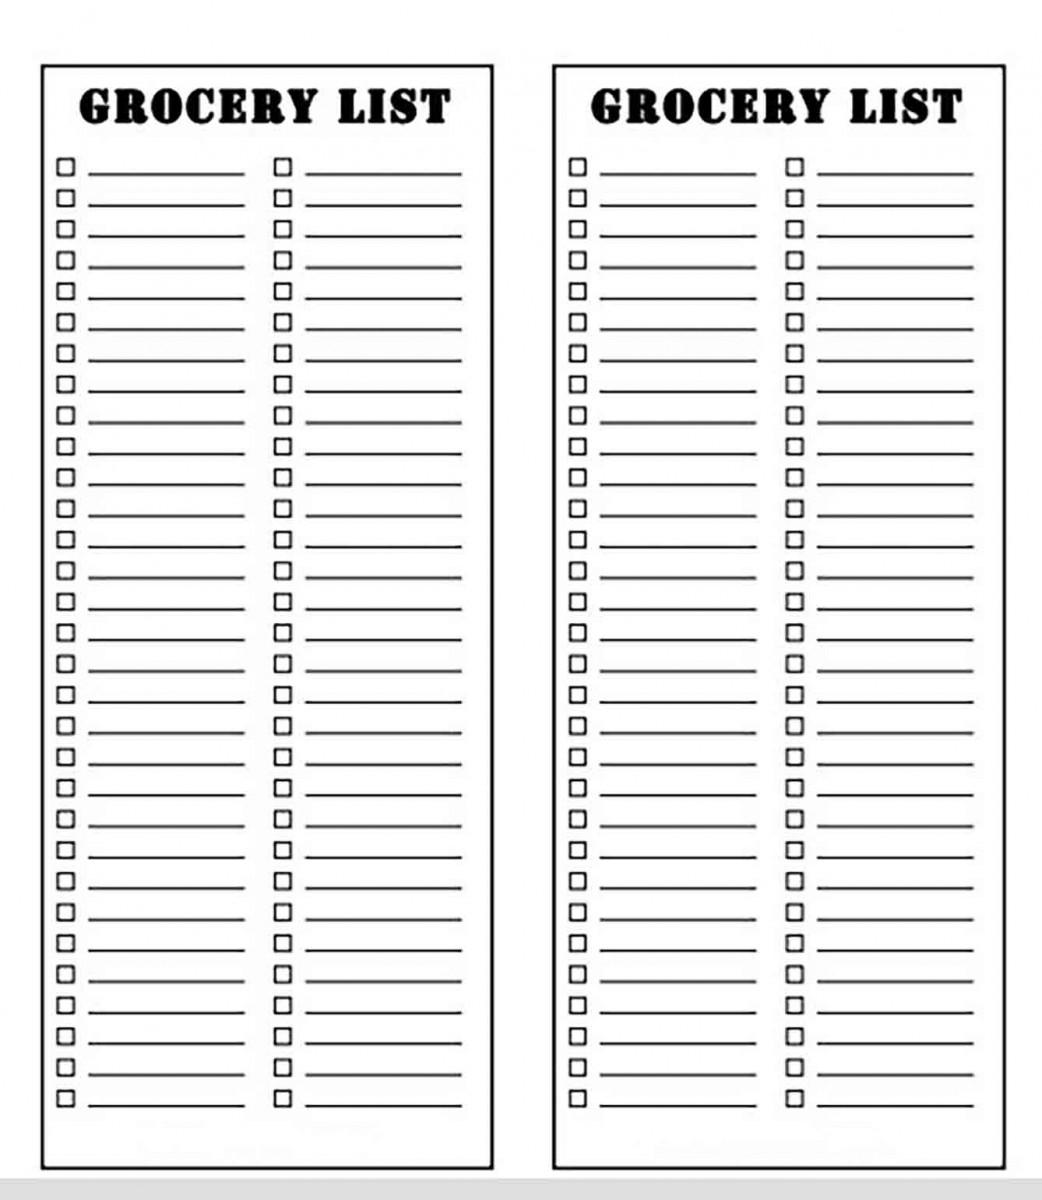 Sample Grocery List templates